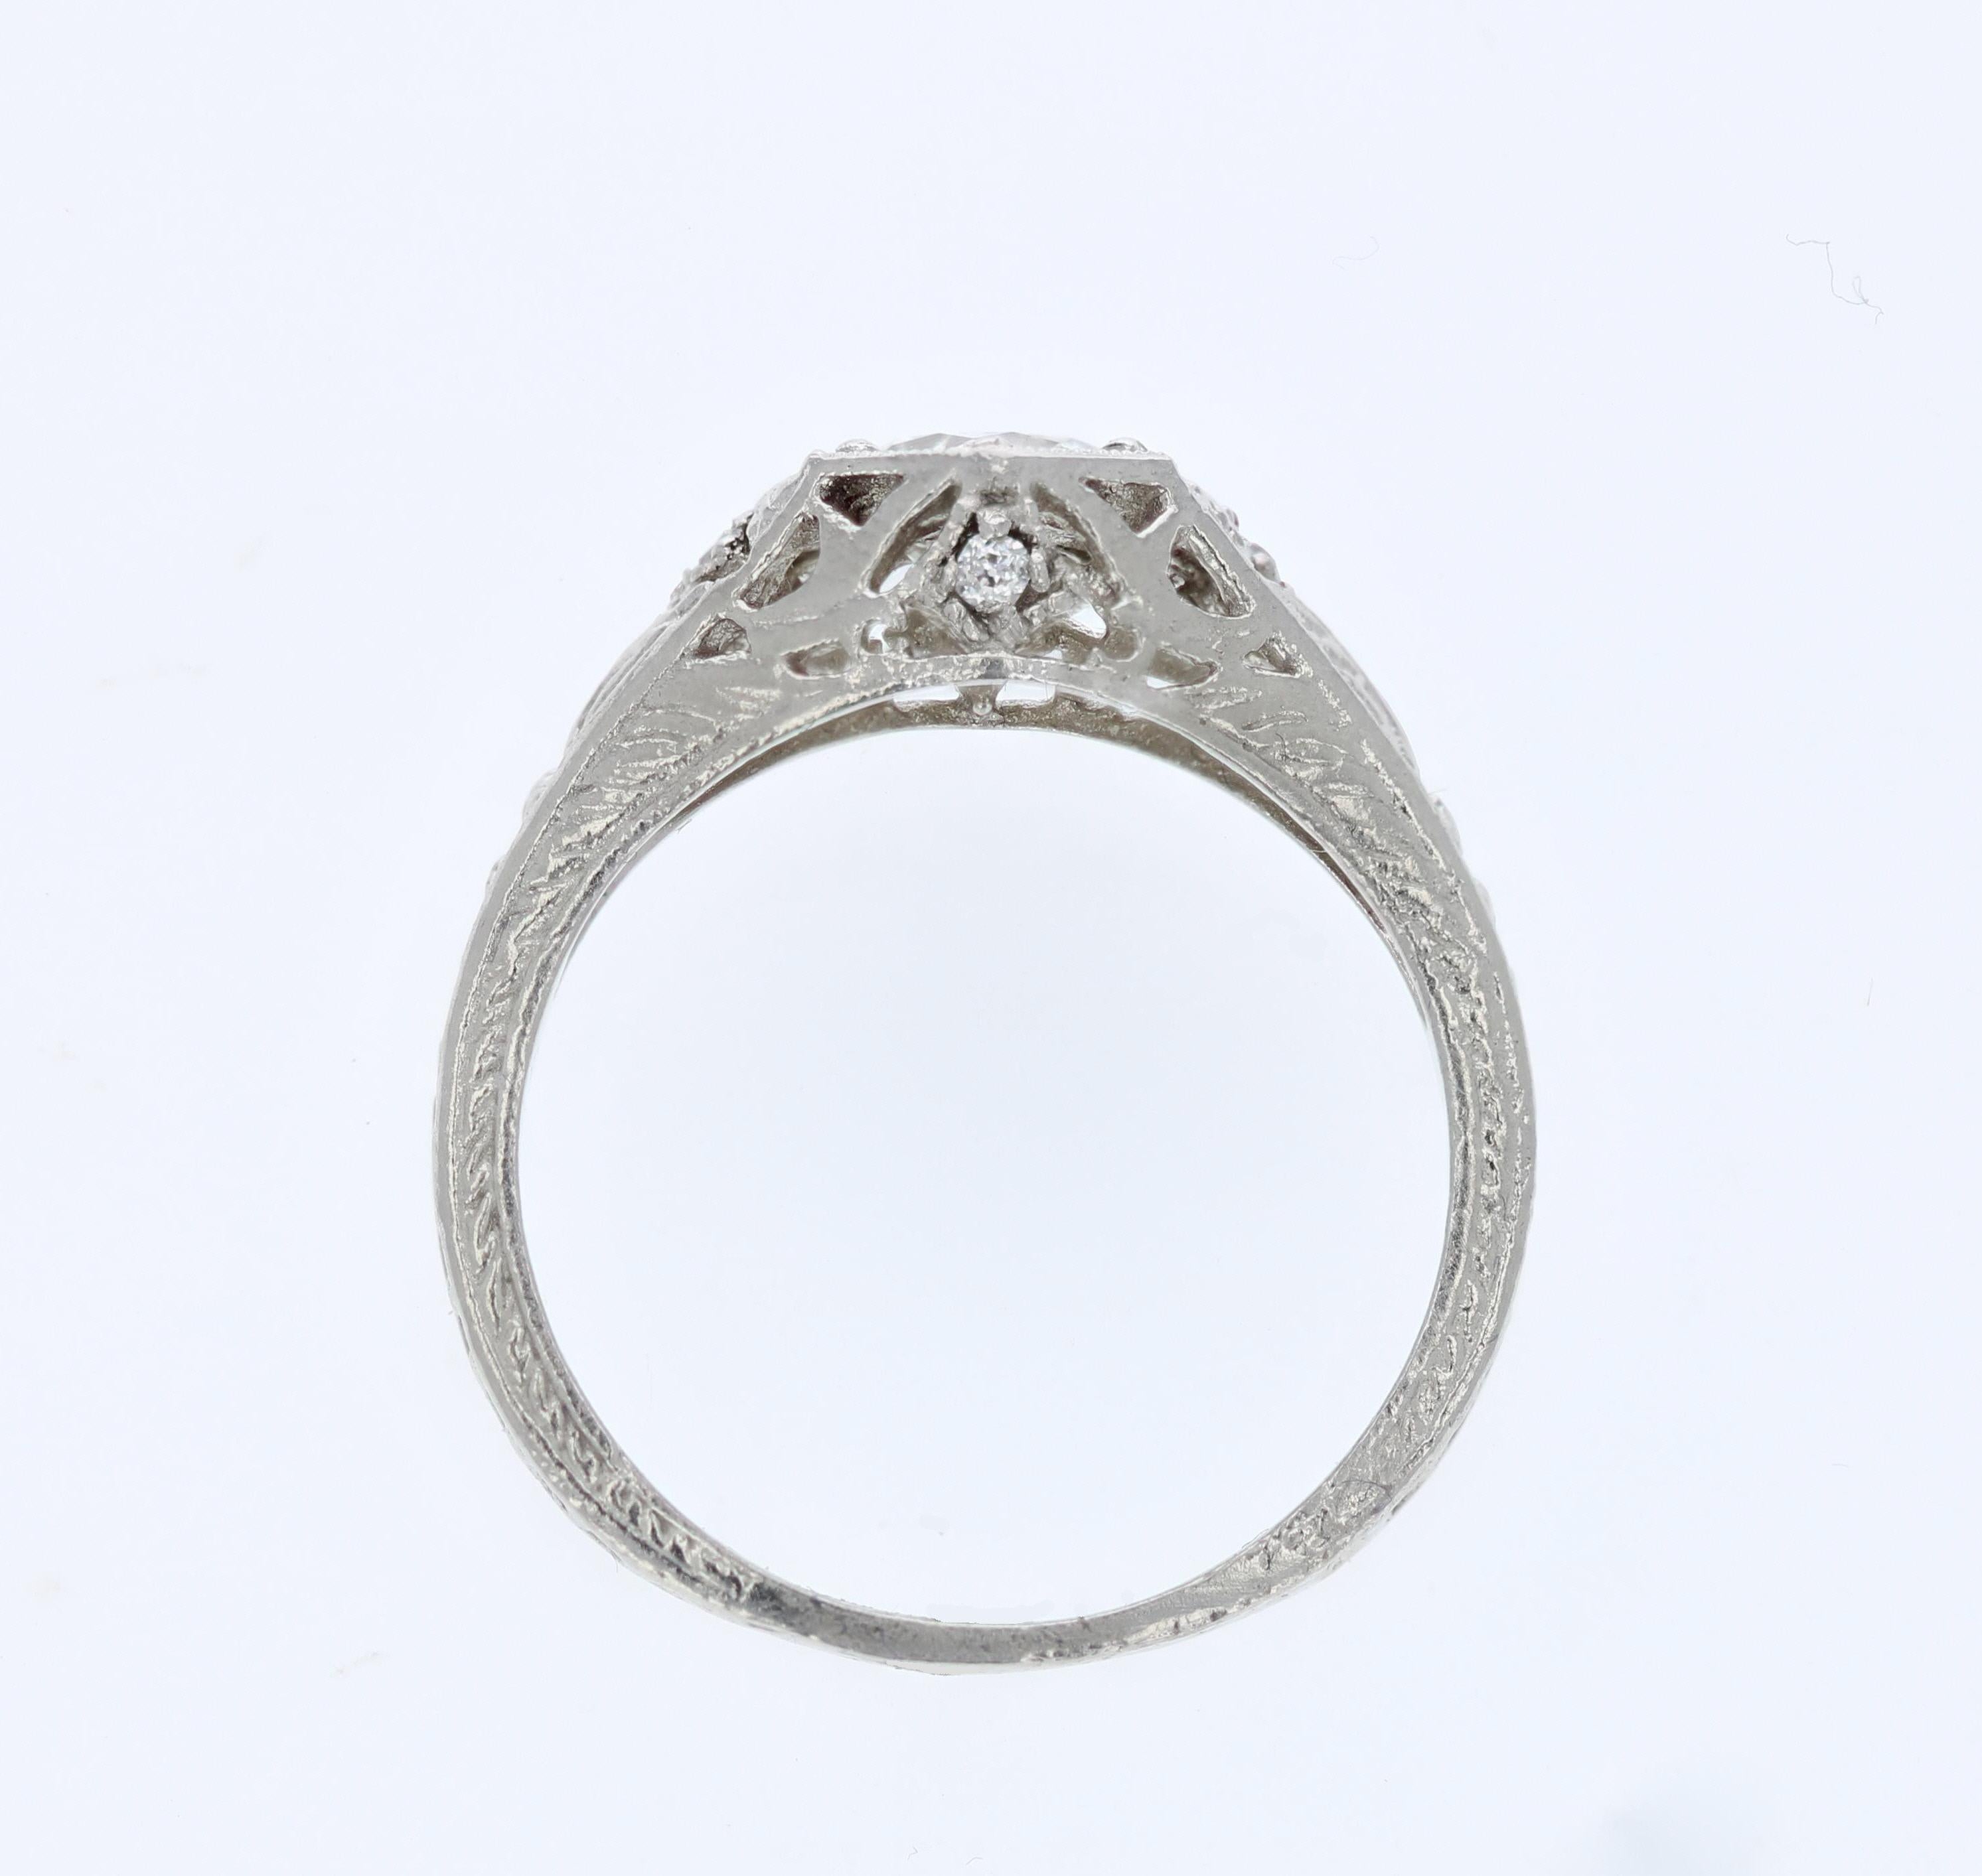 A gleaming white, 0.59 carat old European diamond sits in a unique hexagon shaped setting in this Edwardian engagement ring. Detailed engraving and fine millegrain adorn the platinum setting along with 4 round accent diamonds. The center stone comes